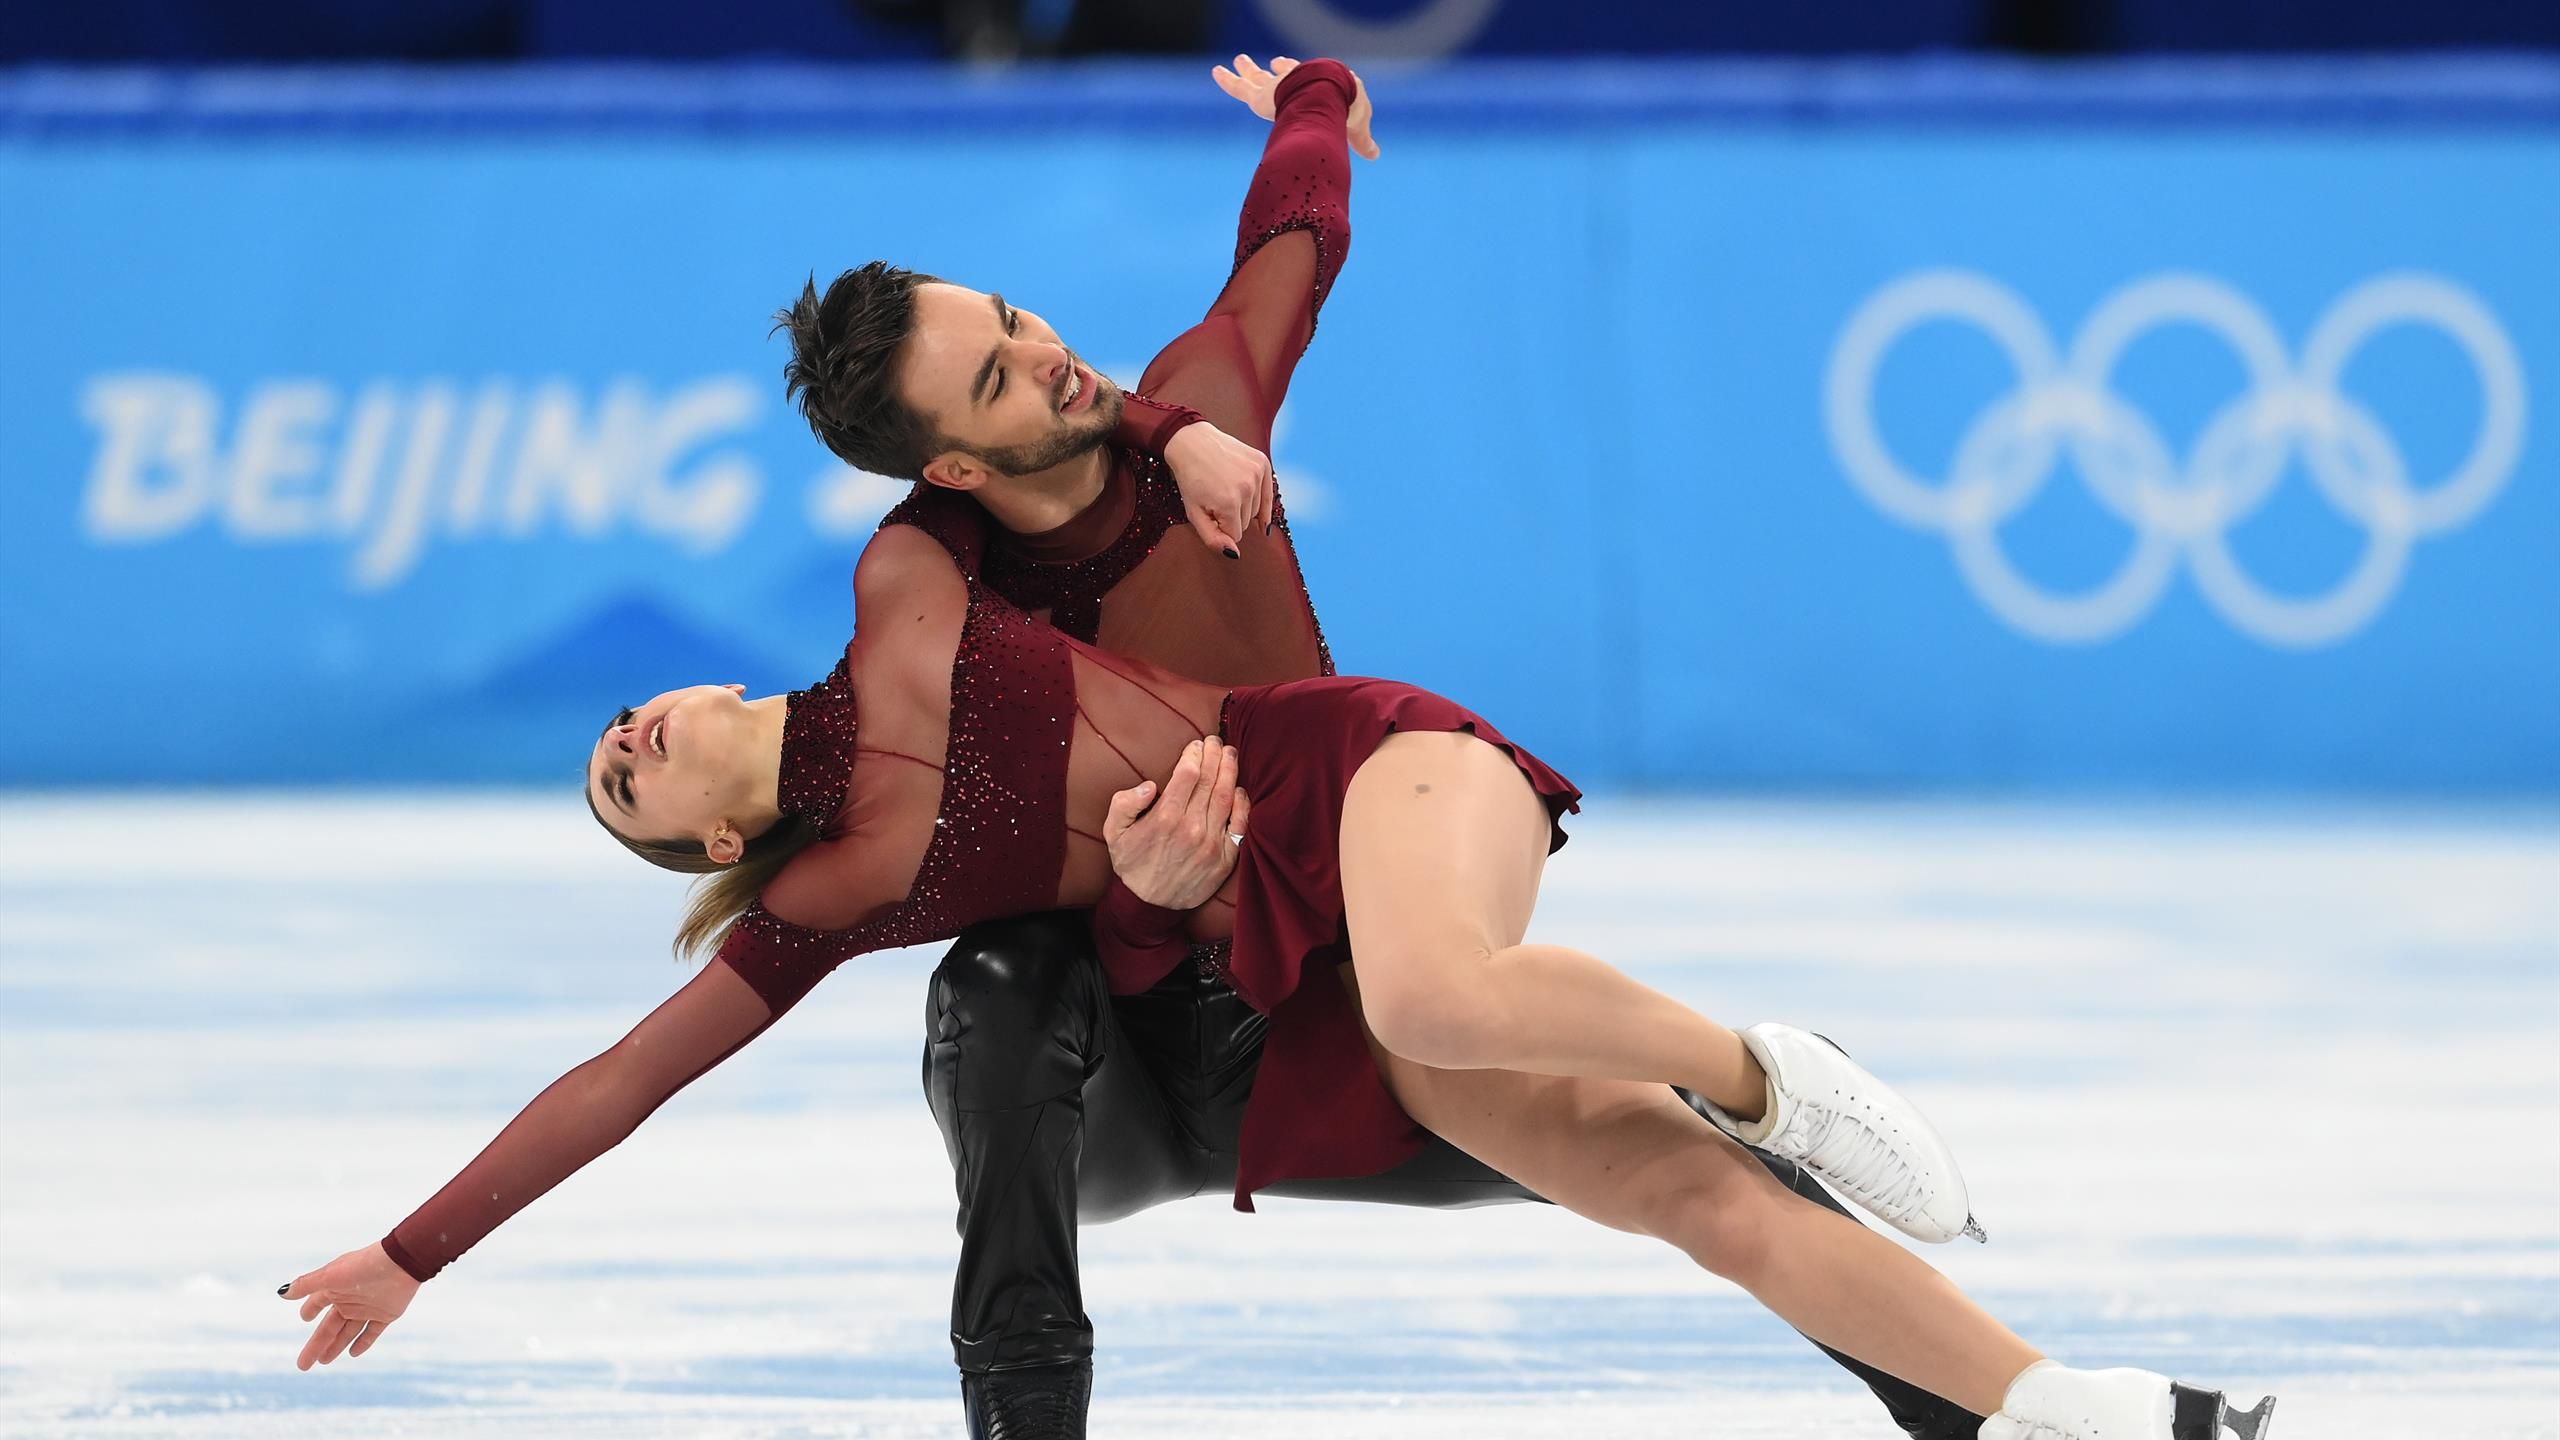 These are the Figure Skating Costumes for the 2022 Beijing Winter Olympics